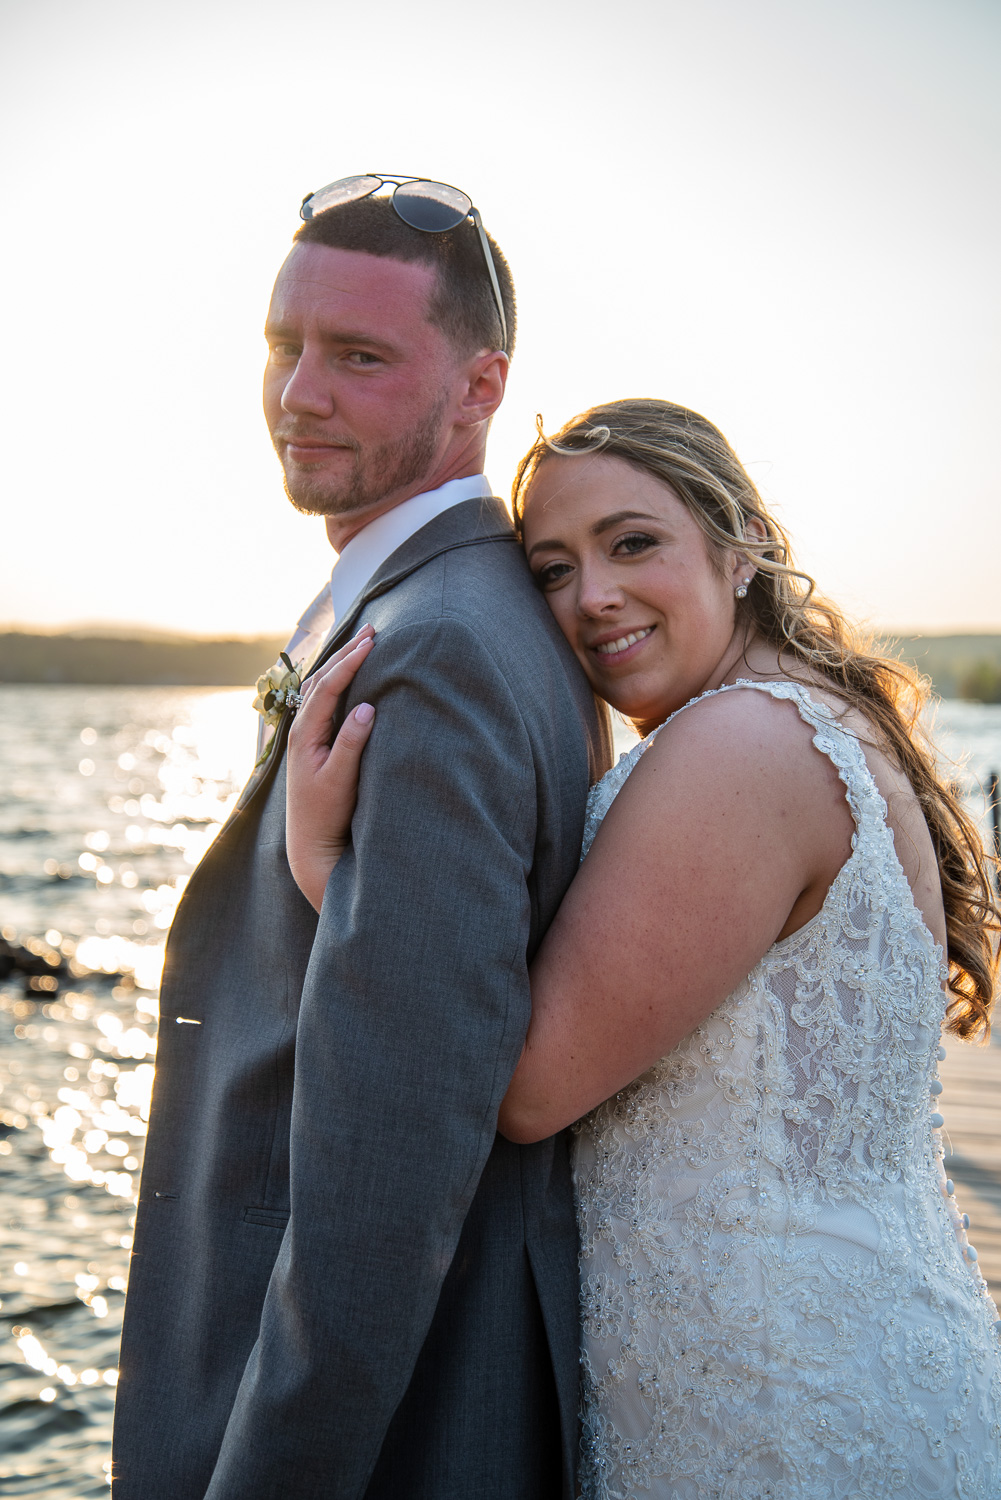 Bride with her arms wrapped around the groom on the dock of the lakeside wedding